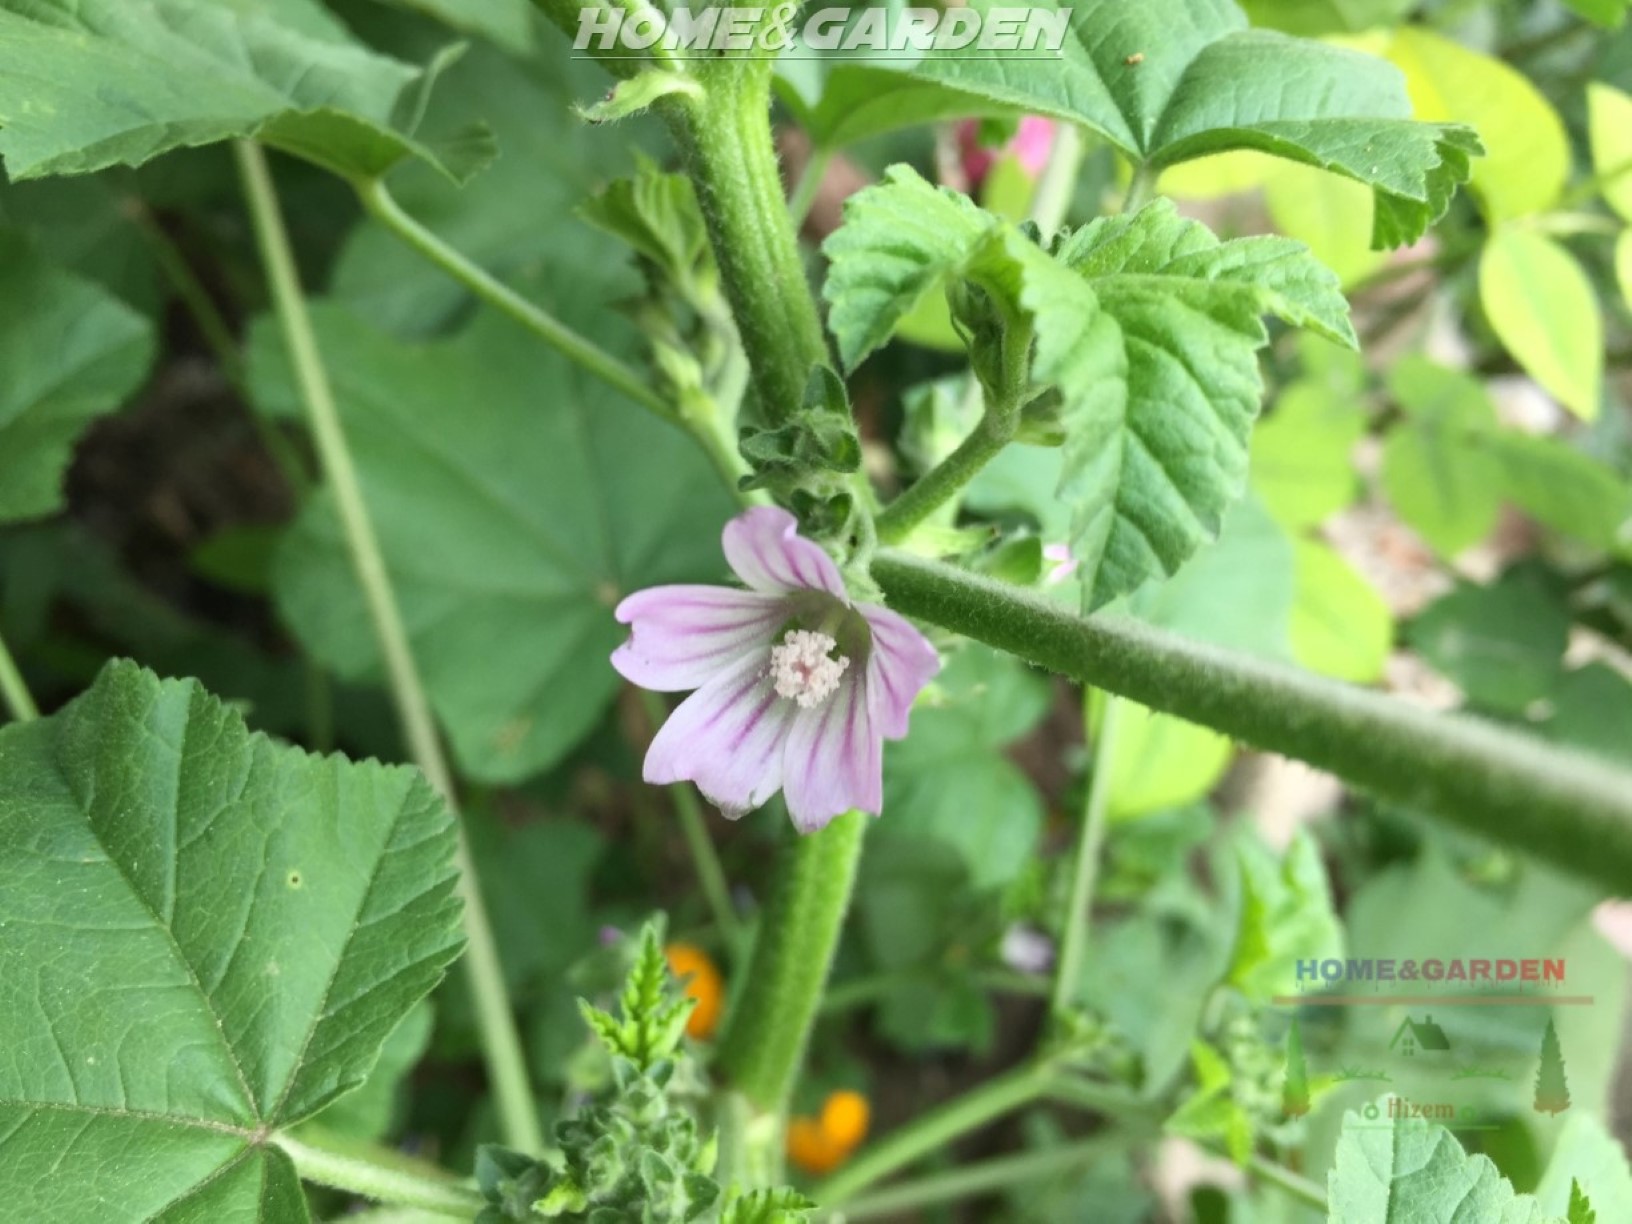 mallow grows up to a height of three feet and produces beautiful, eye-catching, cup-shaped flowers. The flowers have five petals and vary in color from pink to purple and white.